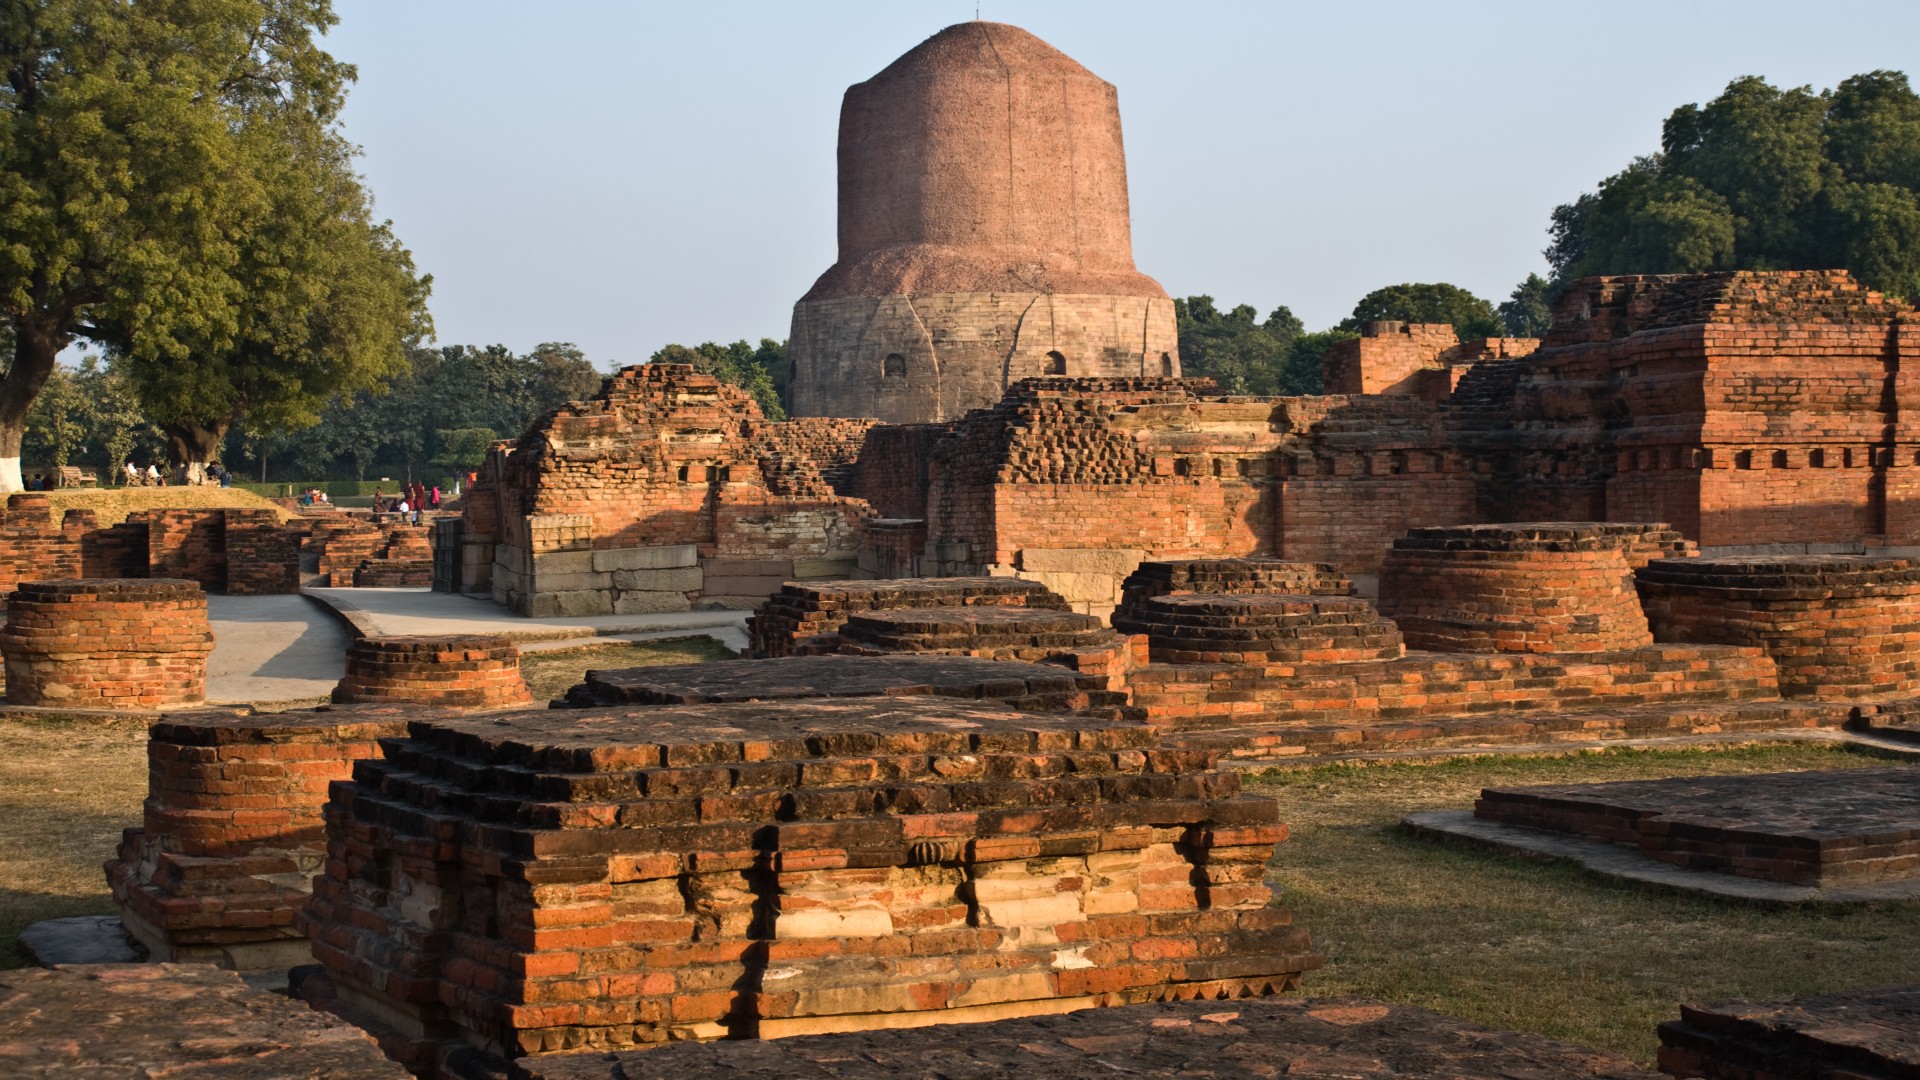 This photo shows the Dhamekh stupa in India. It is a tall mound-like structure.